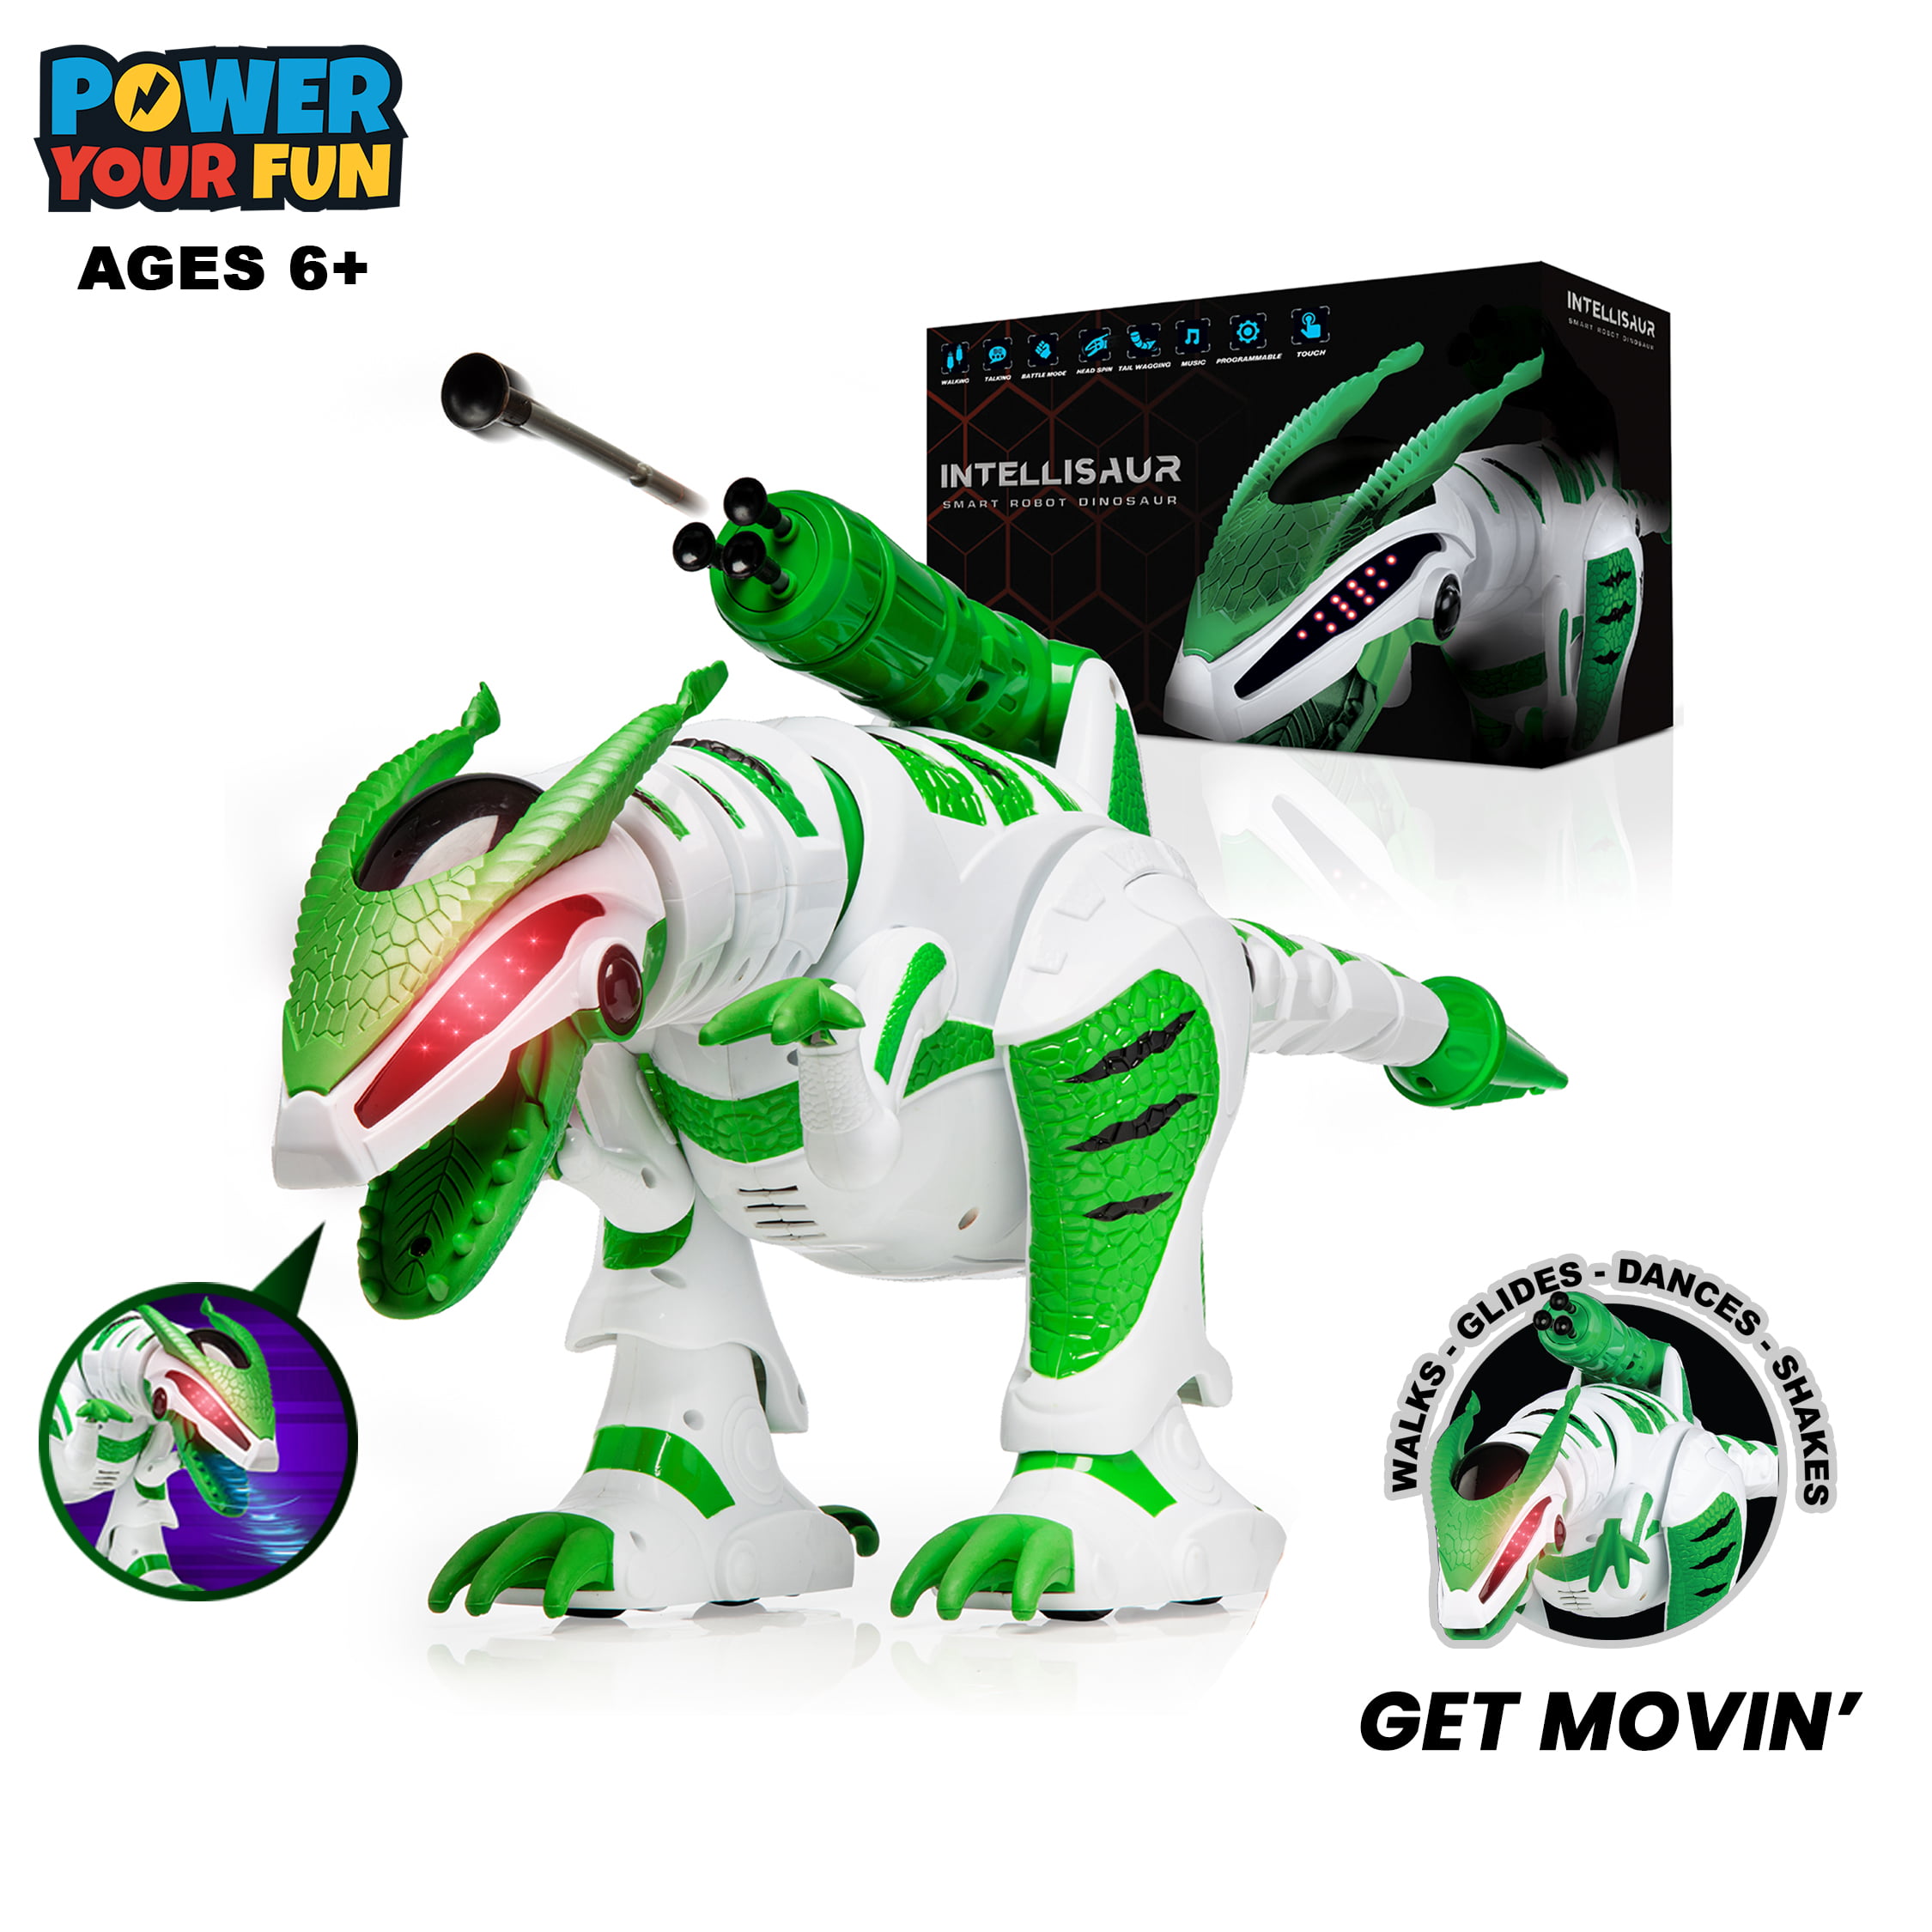 Runs Walks GREEN Age 5+ Lights Up Moving Head and Tail Large-28 Inches Long YARMOSHI Green / Gray Dragon Robotic Toy w/ Remote Control and USB Charger Makes Sounds Gift for Boys and Girls 